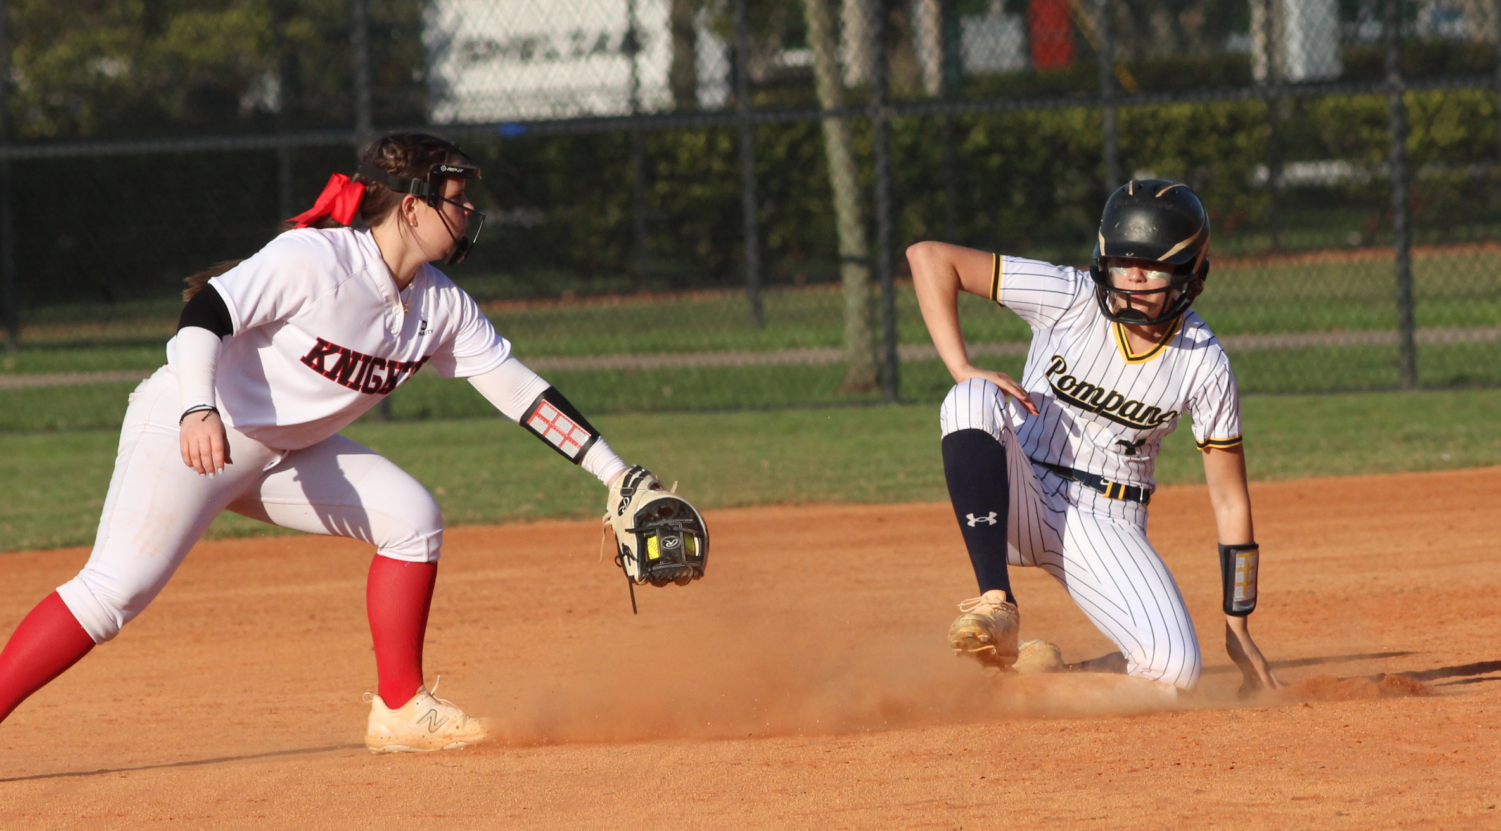 Sophomore Bridget Swanepoel reaches second base before a Monarch player can tag her out in the opening game of the season on Feb. 21. The team mercied Monarch 10-0.